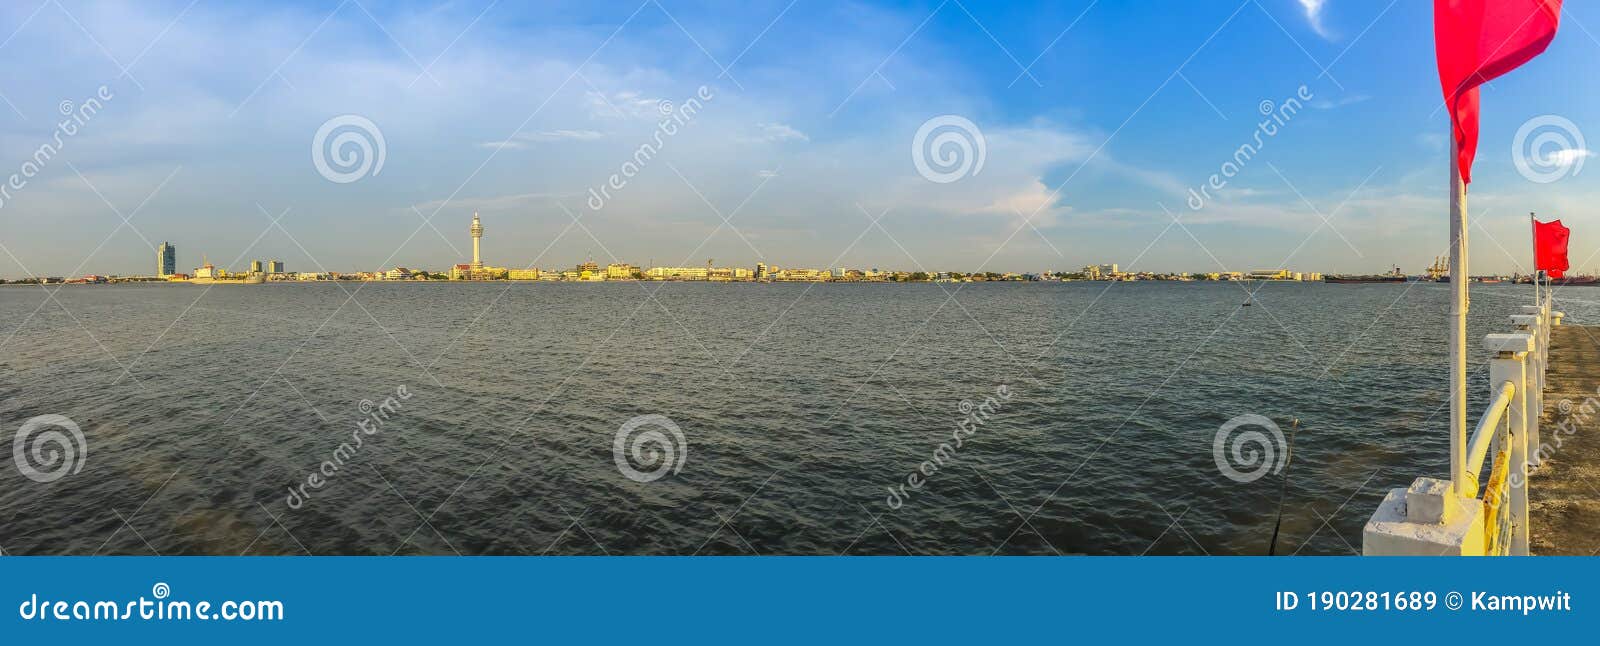 Riverfront View Of Samut Prakan City Hall With New Observation Tower And Boat Pier Samut Prakan Is At The Mouth Of The Chao Stock Image Image Of Park Beautiful